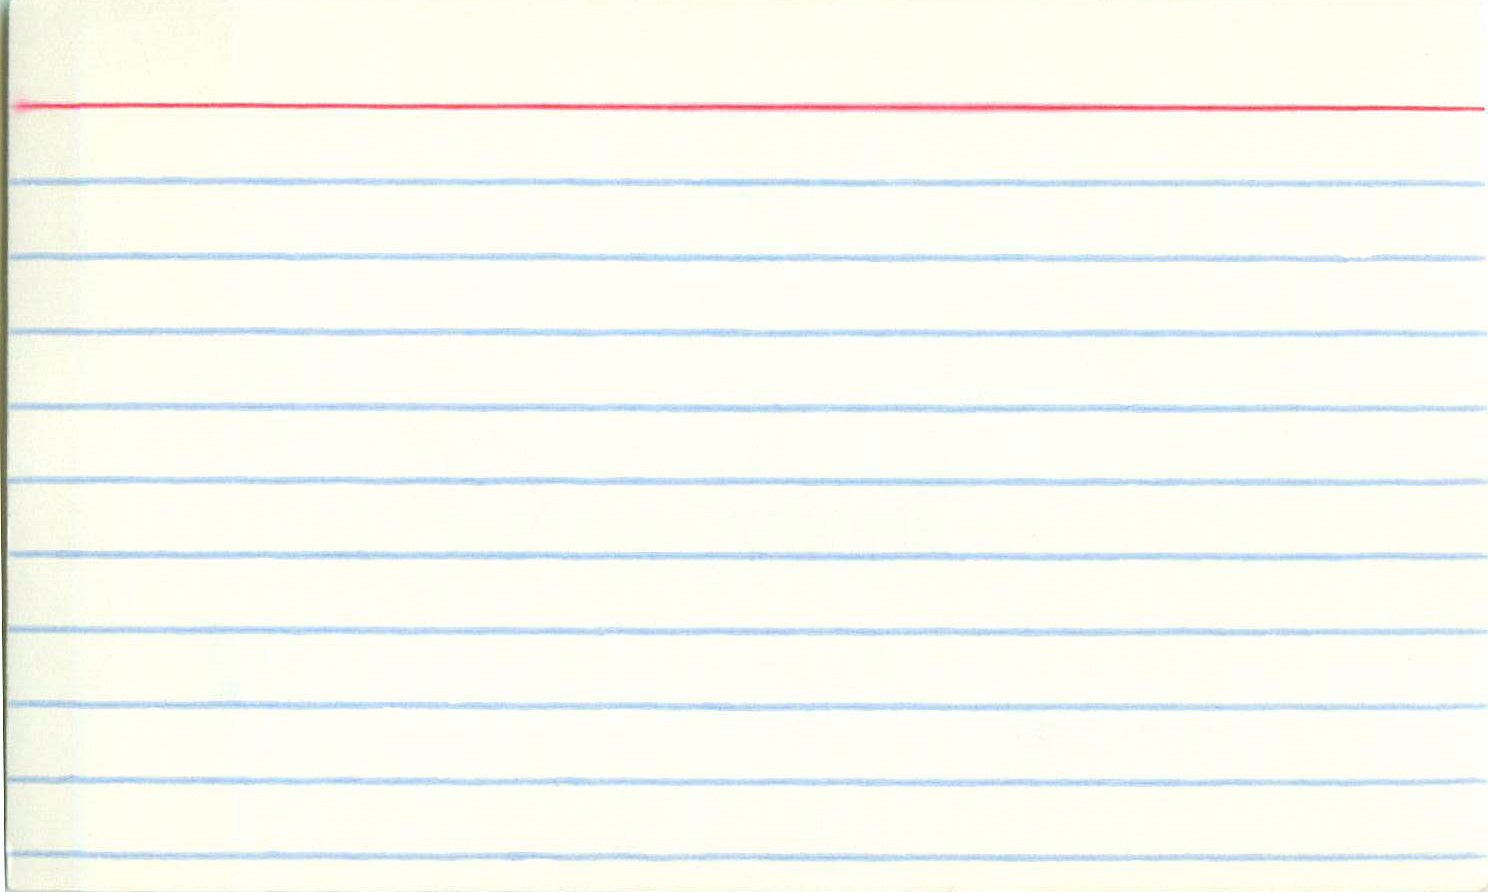 Blank index card! - StockPholio.com  Free Stock Photos Throughout 5 By 8 Index Card Template